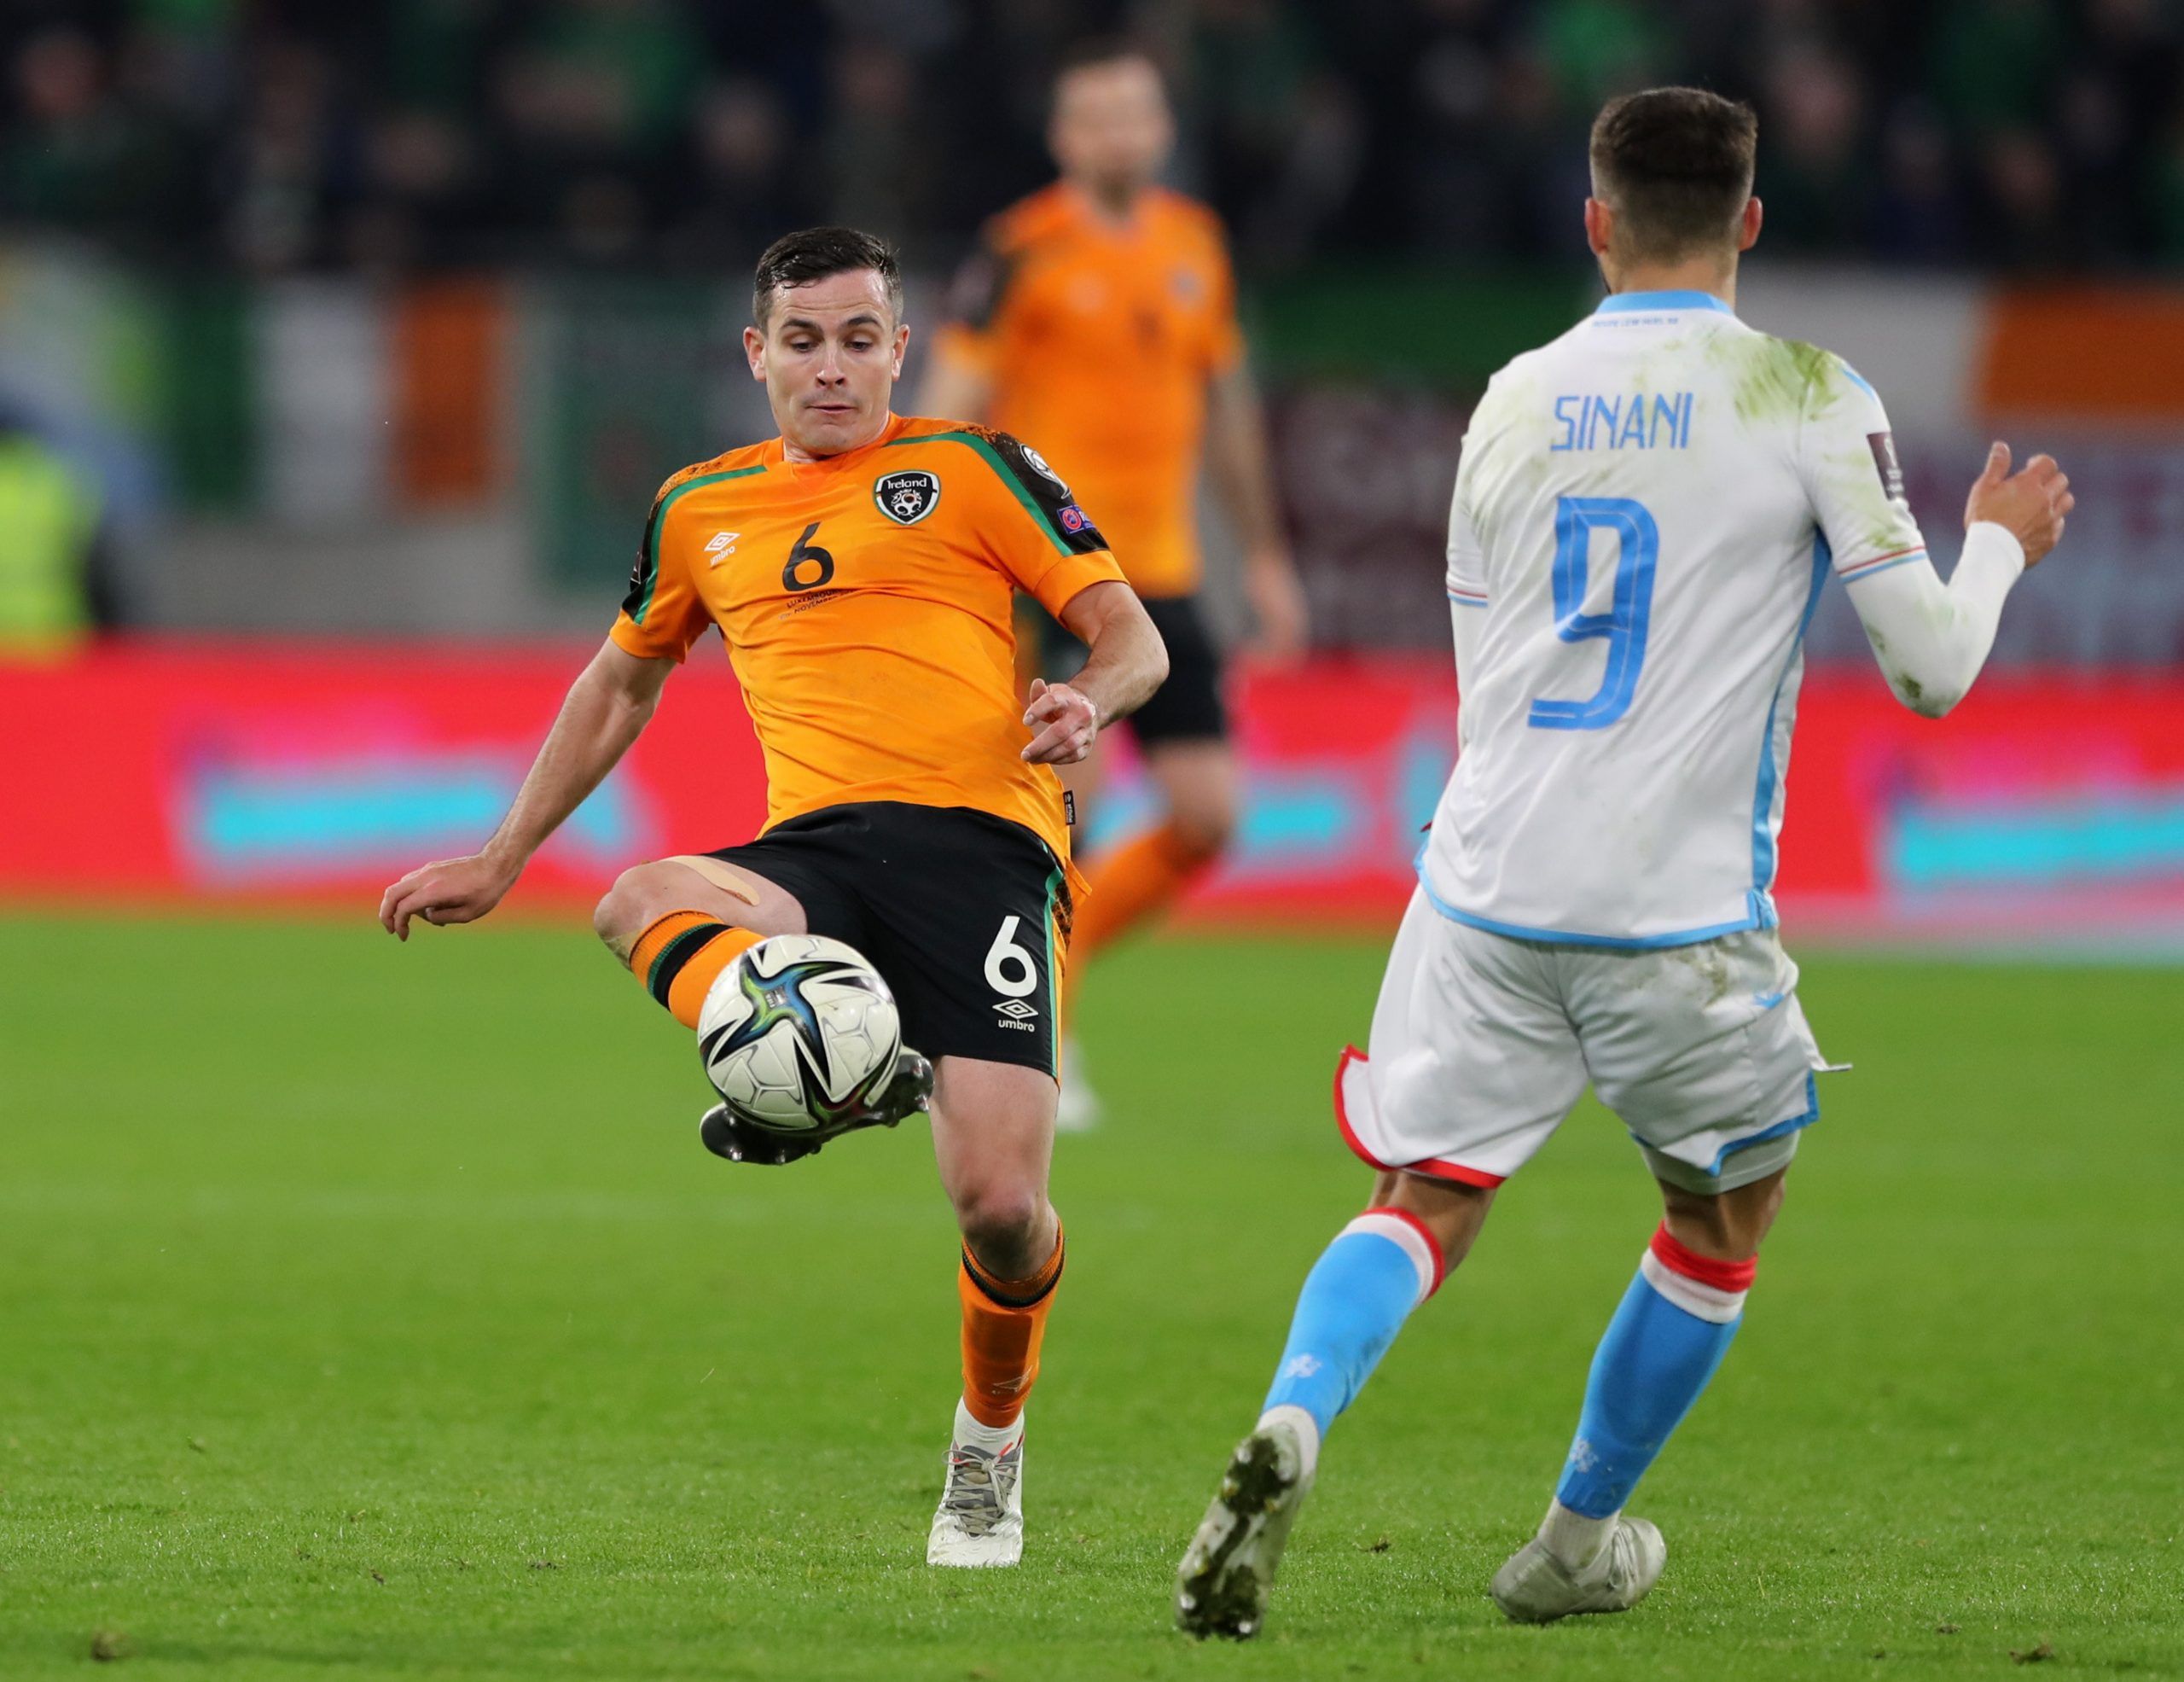 Soccer Football - World Cup - UEFA Qualifiers - Group A - Luxembourg v Republic of Ireland - Stade de Luxembourg, Luxembourg City, Luxembourg - November 14, 2021  Republic of Ireland's Josh Cullen in action with Luxembourg's Daniel Sinani REUTERS/Pascal Rossignol